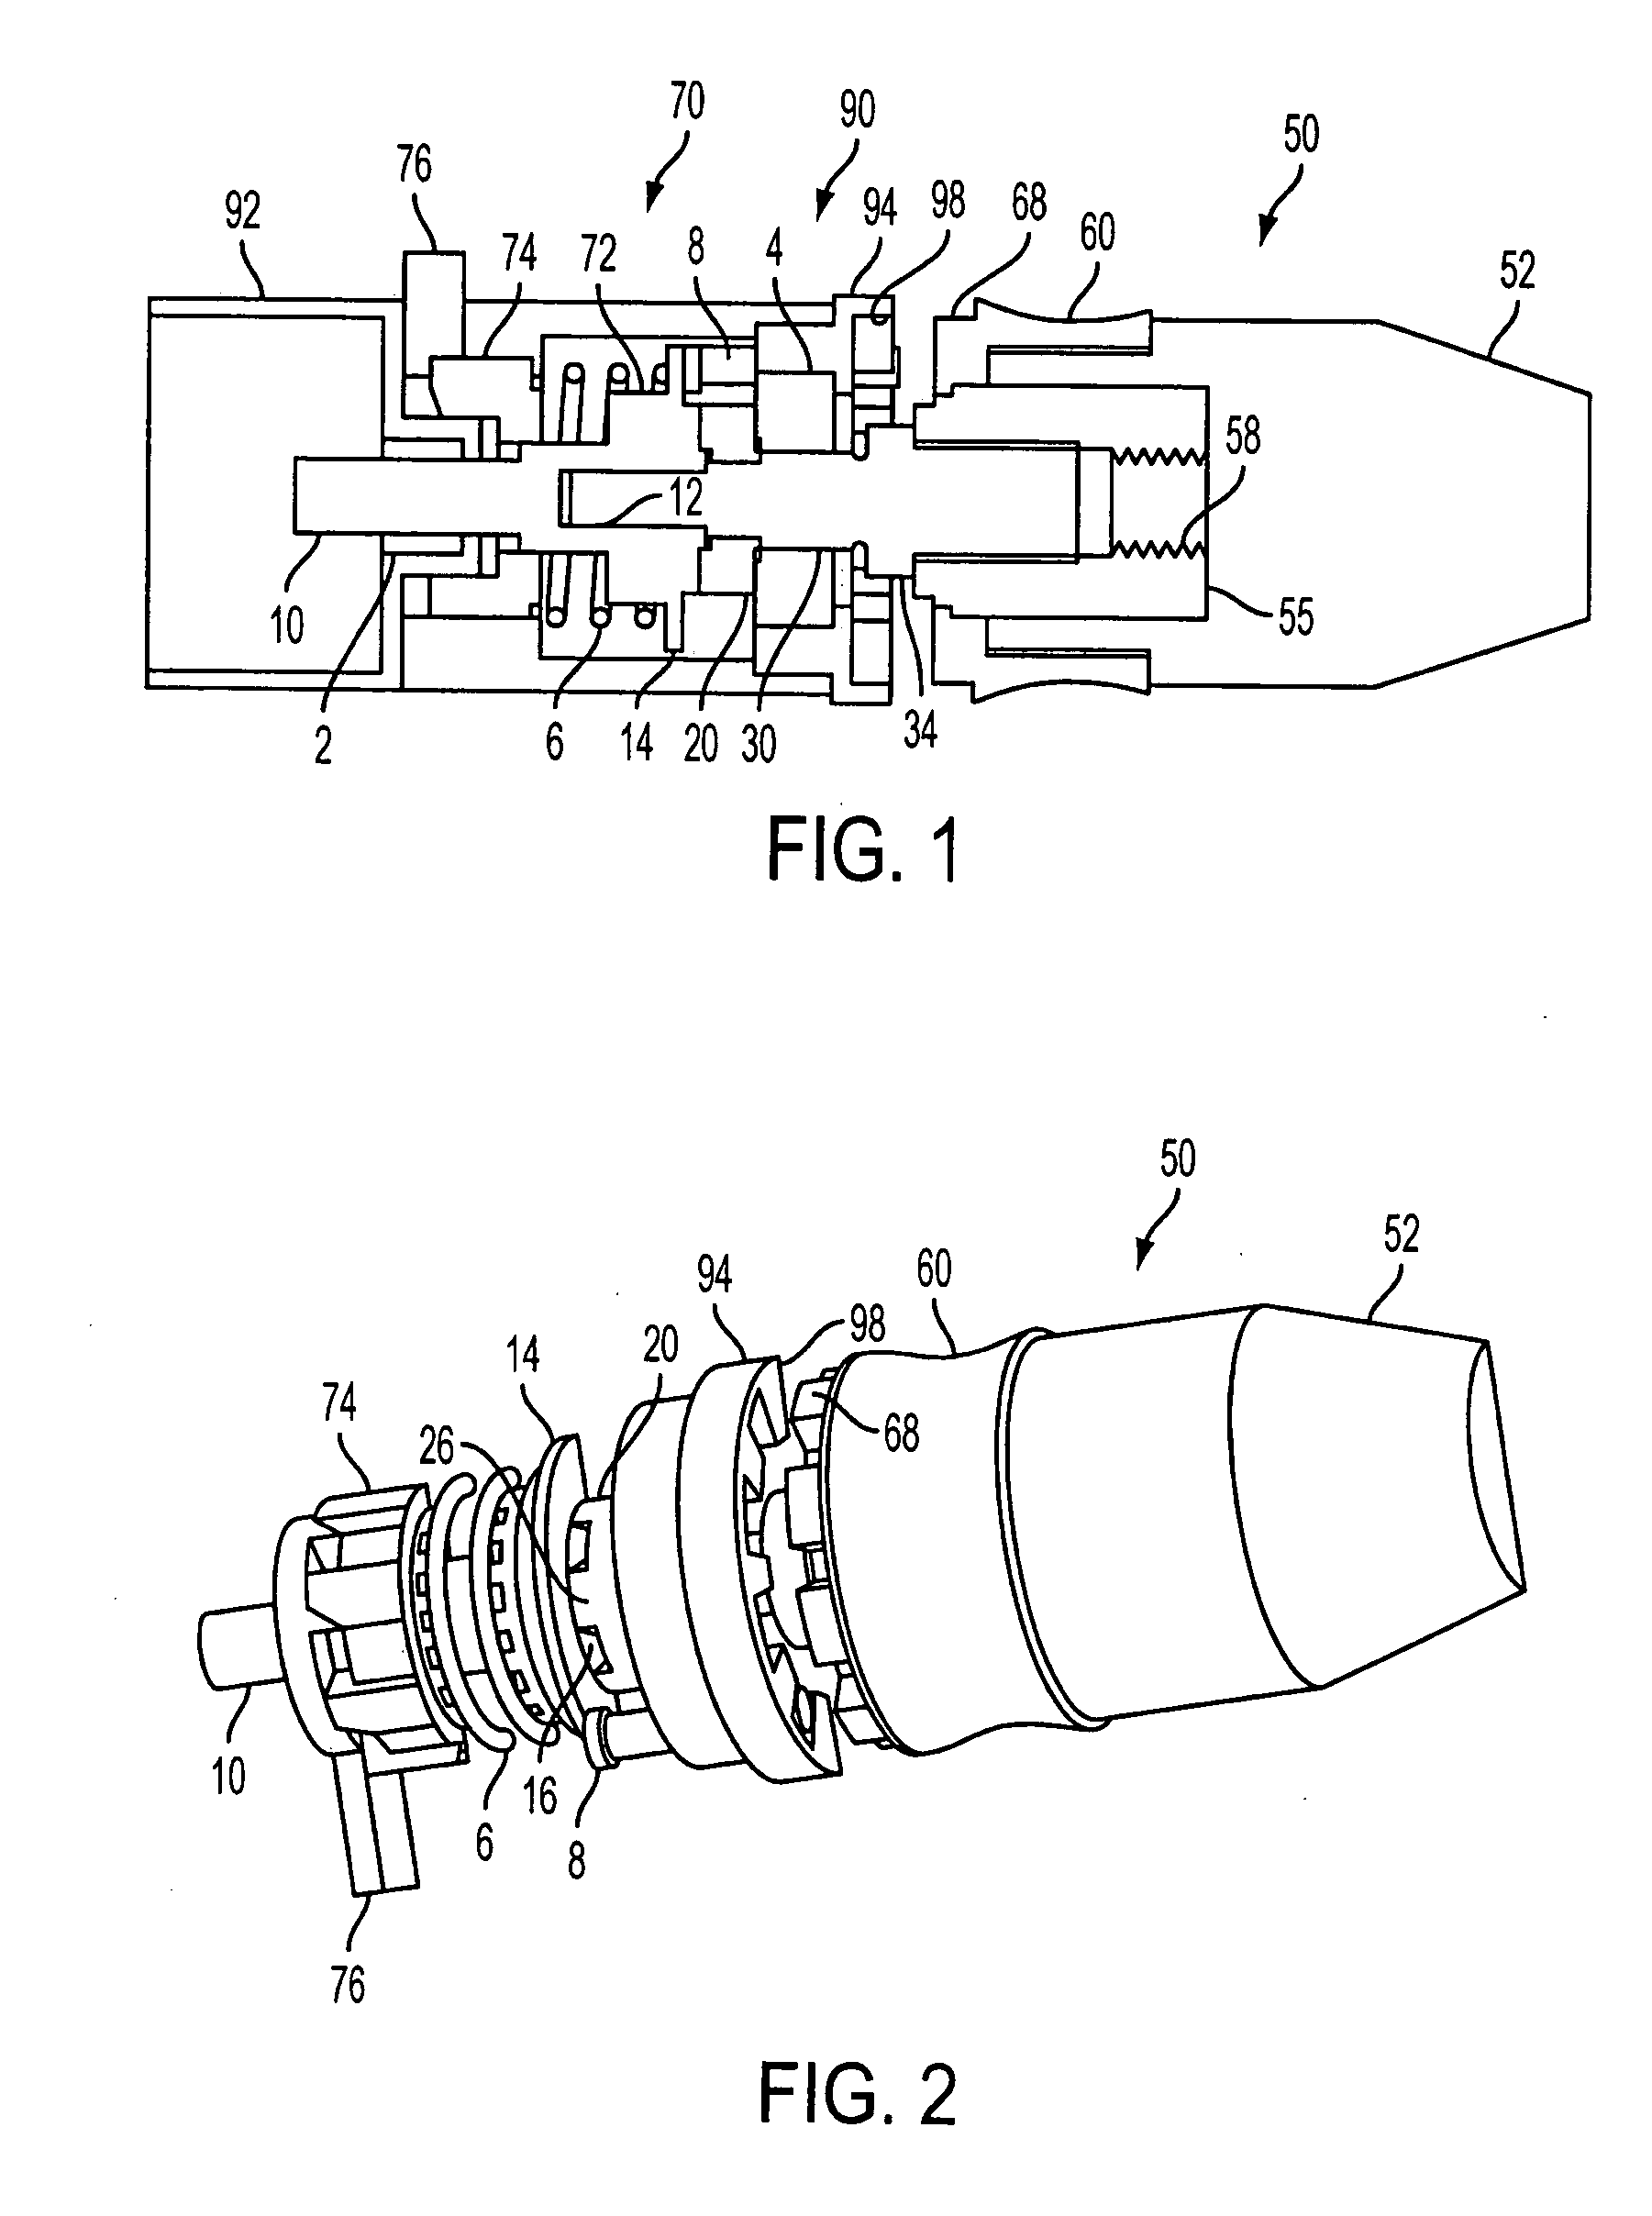 Dead spindle chucking system with sliding sleeve